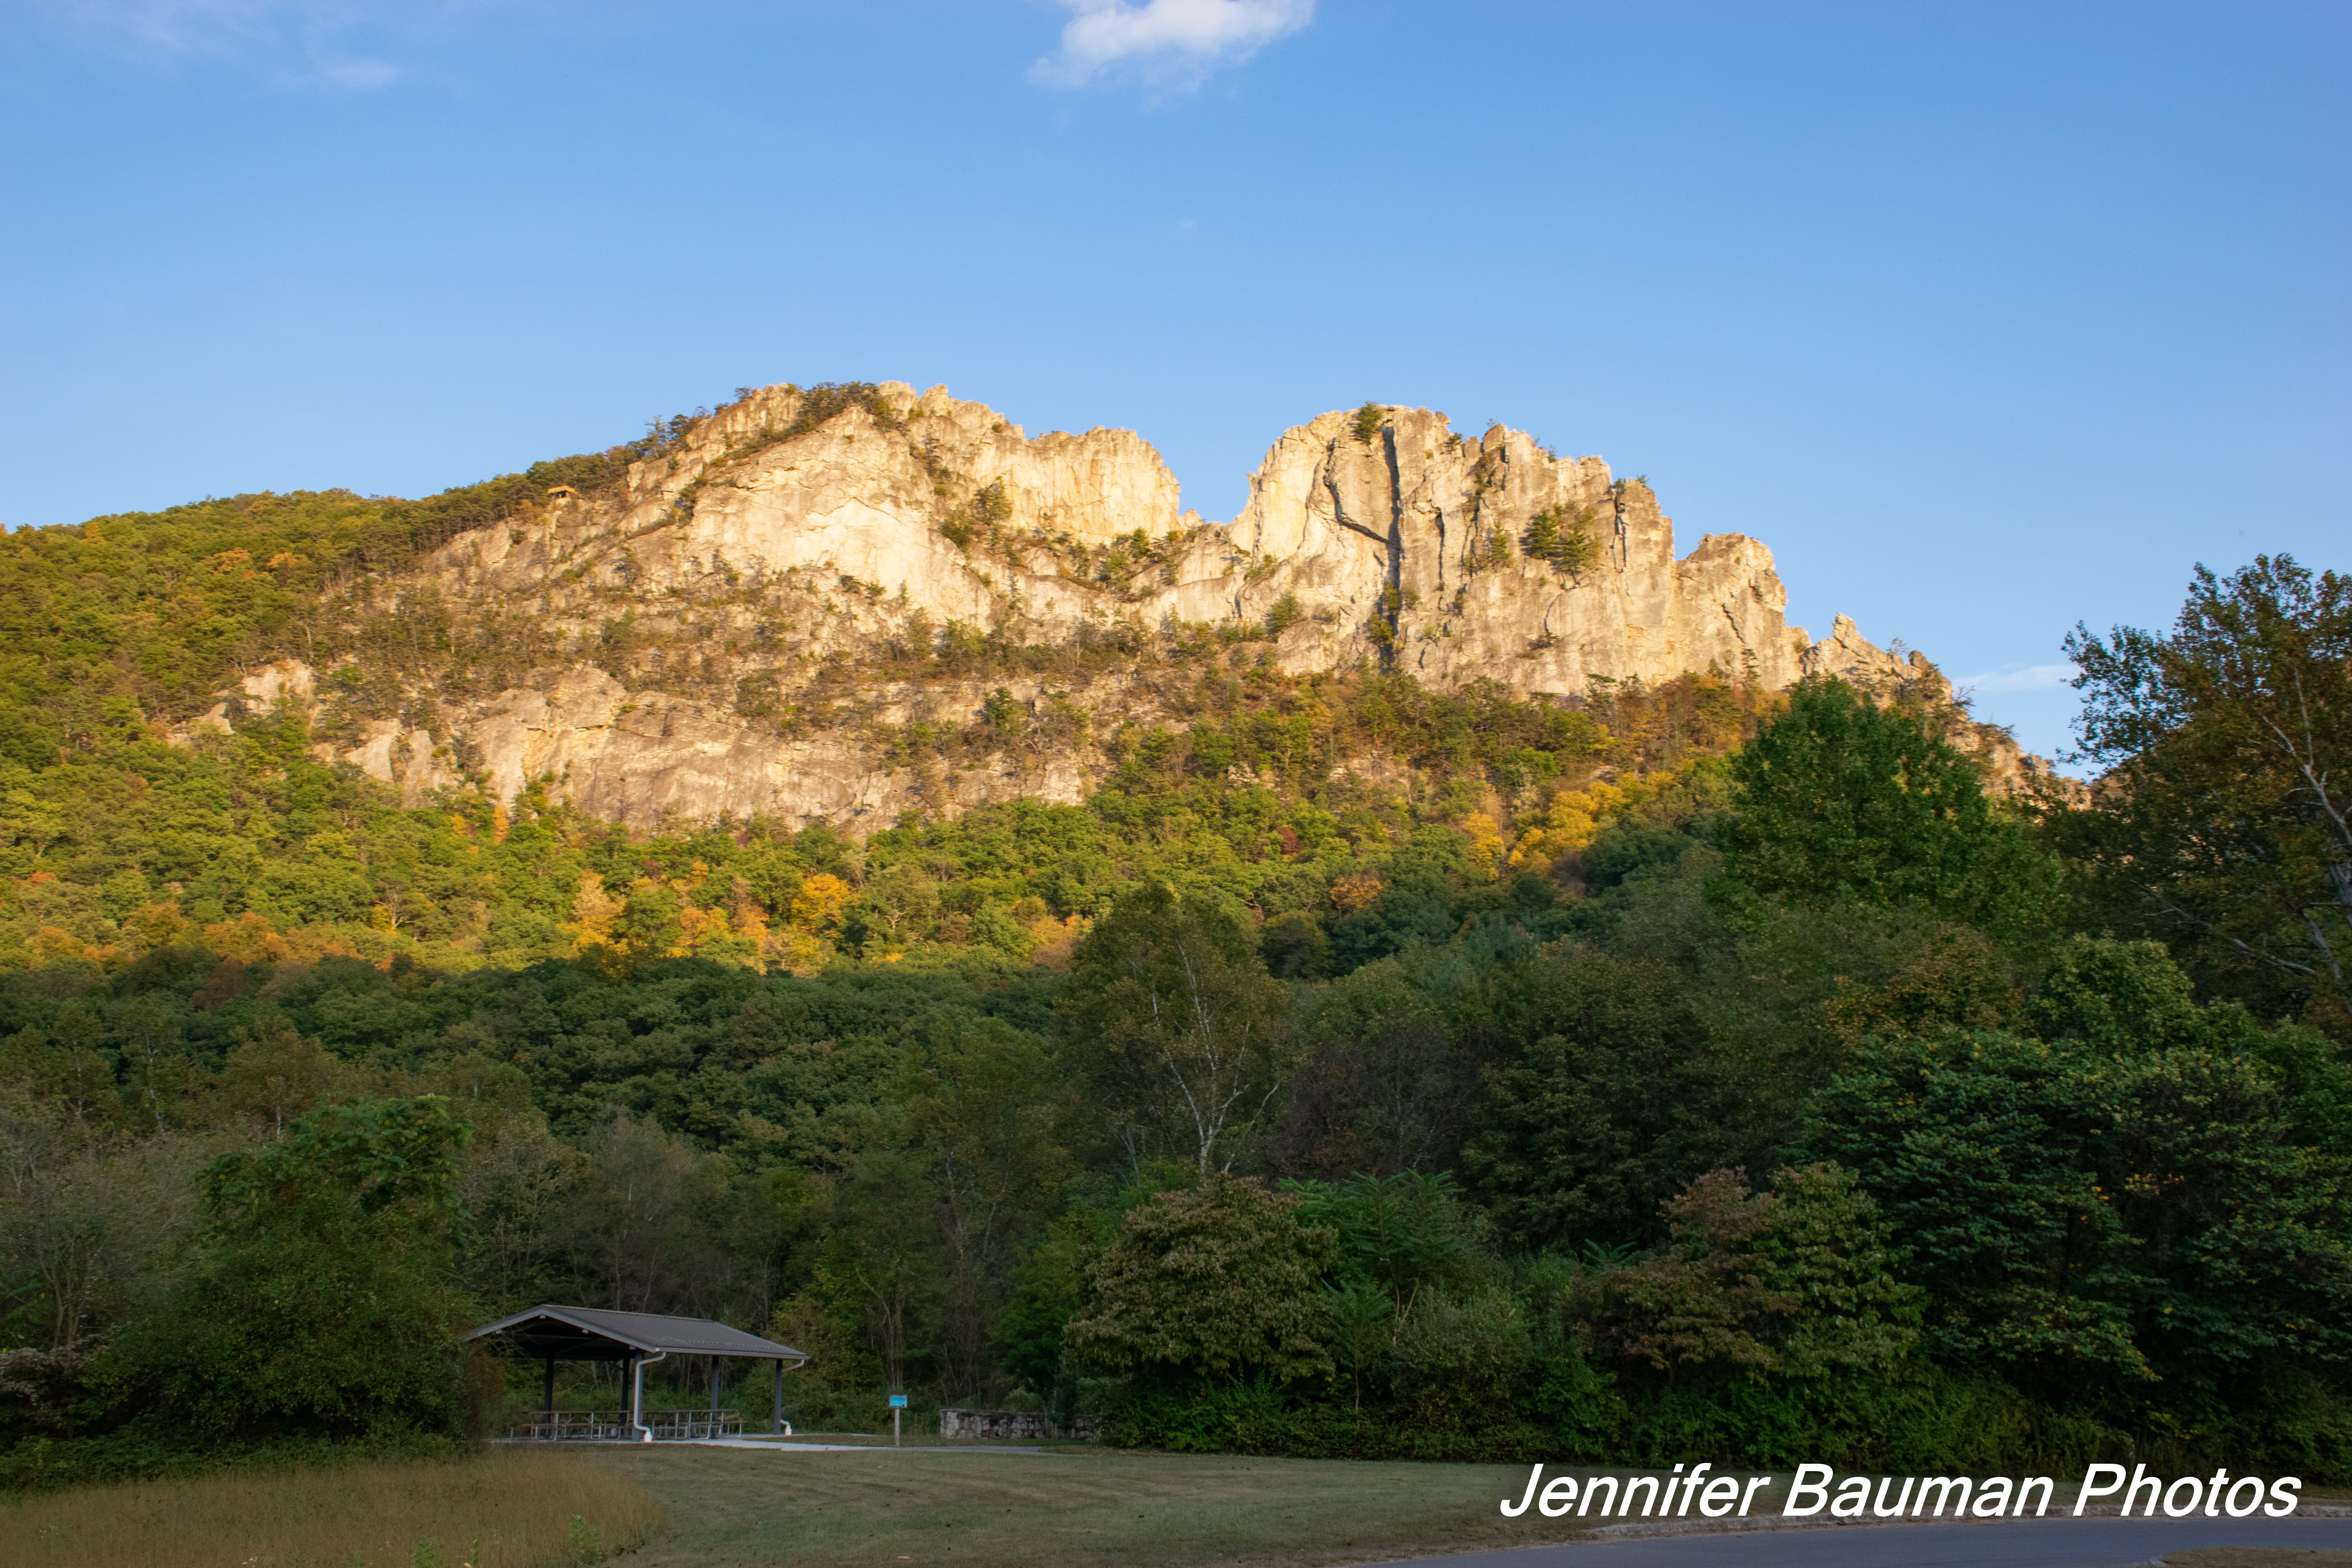 Seneca Rocks less than an hour away and well worth a visit.